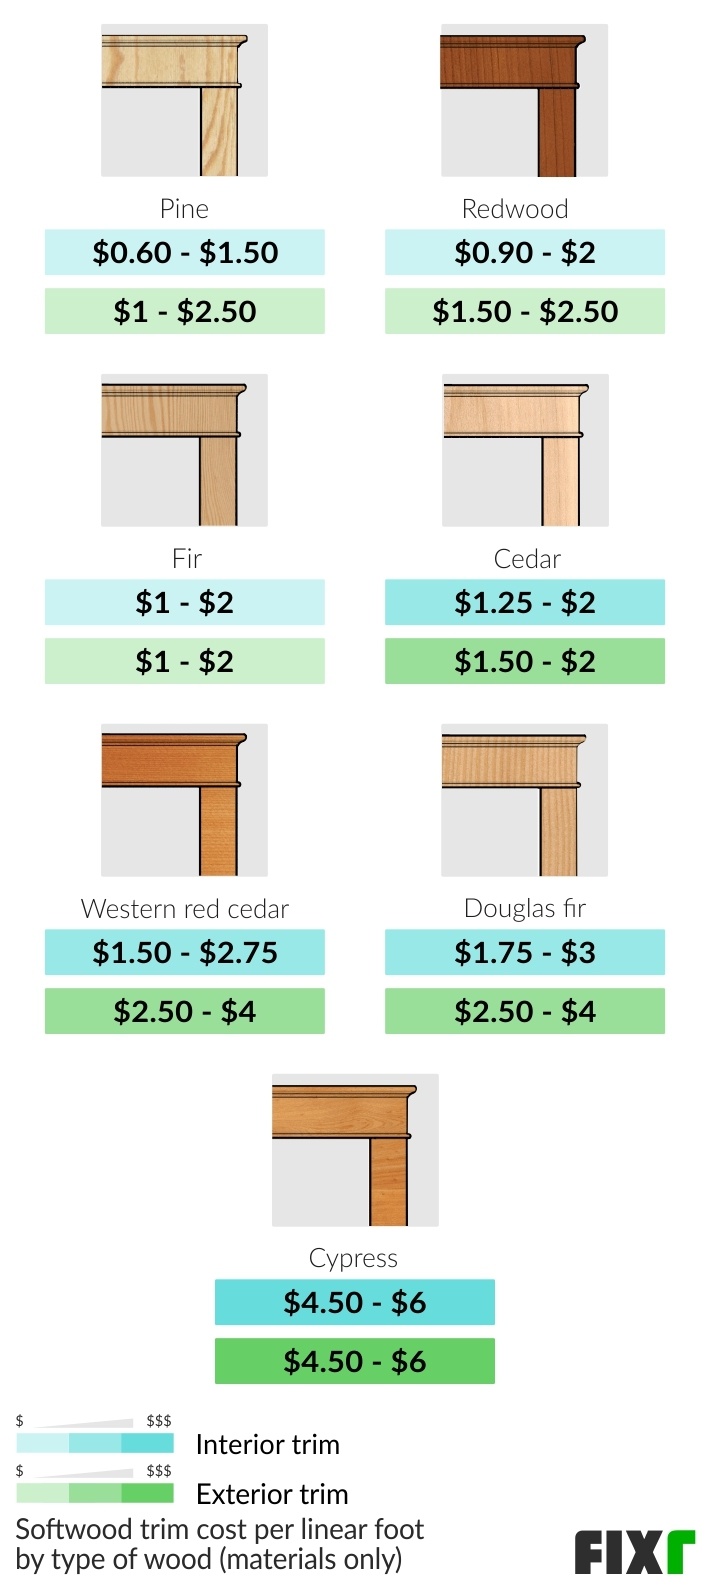 Cost per Linear Foot of Interior or Exterior Softwood Trim by Type of Softwood: Pine, Redwood, Fir, Cedar, Western Red Cedar...